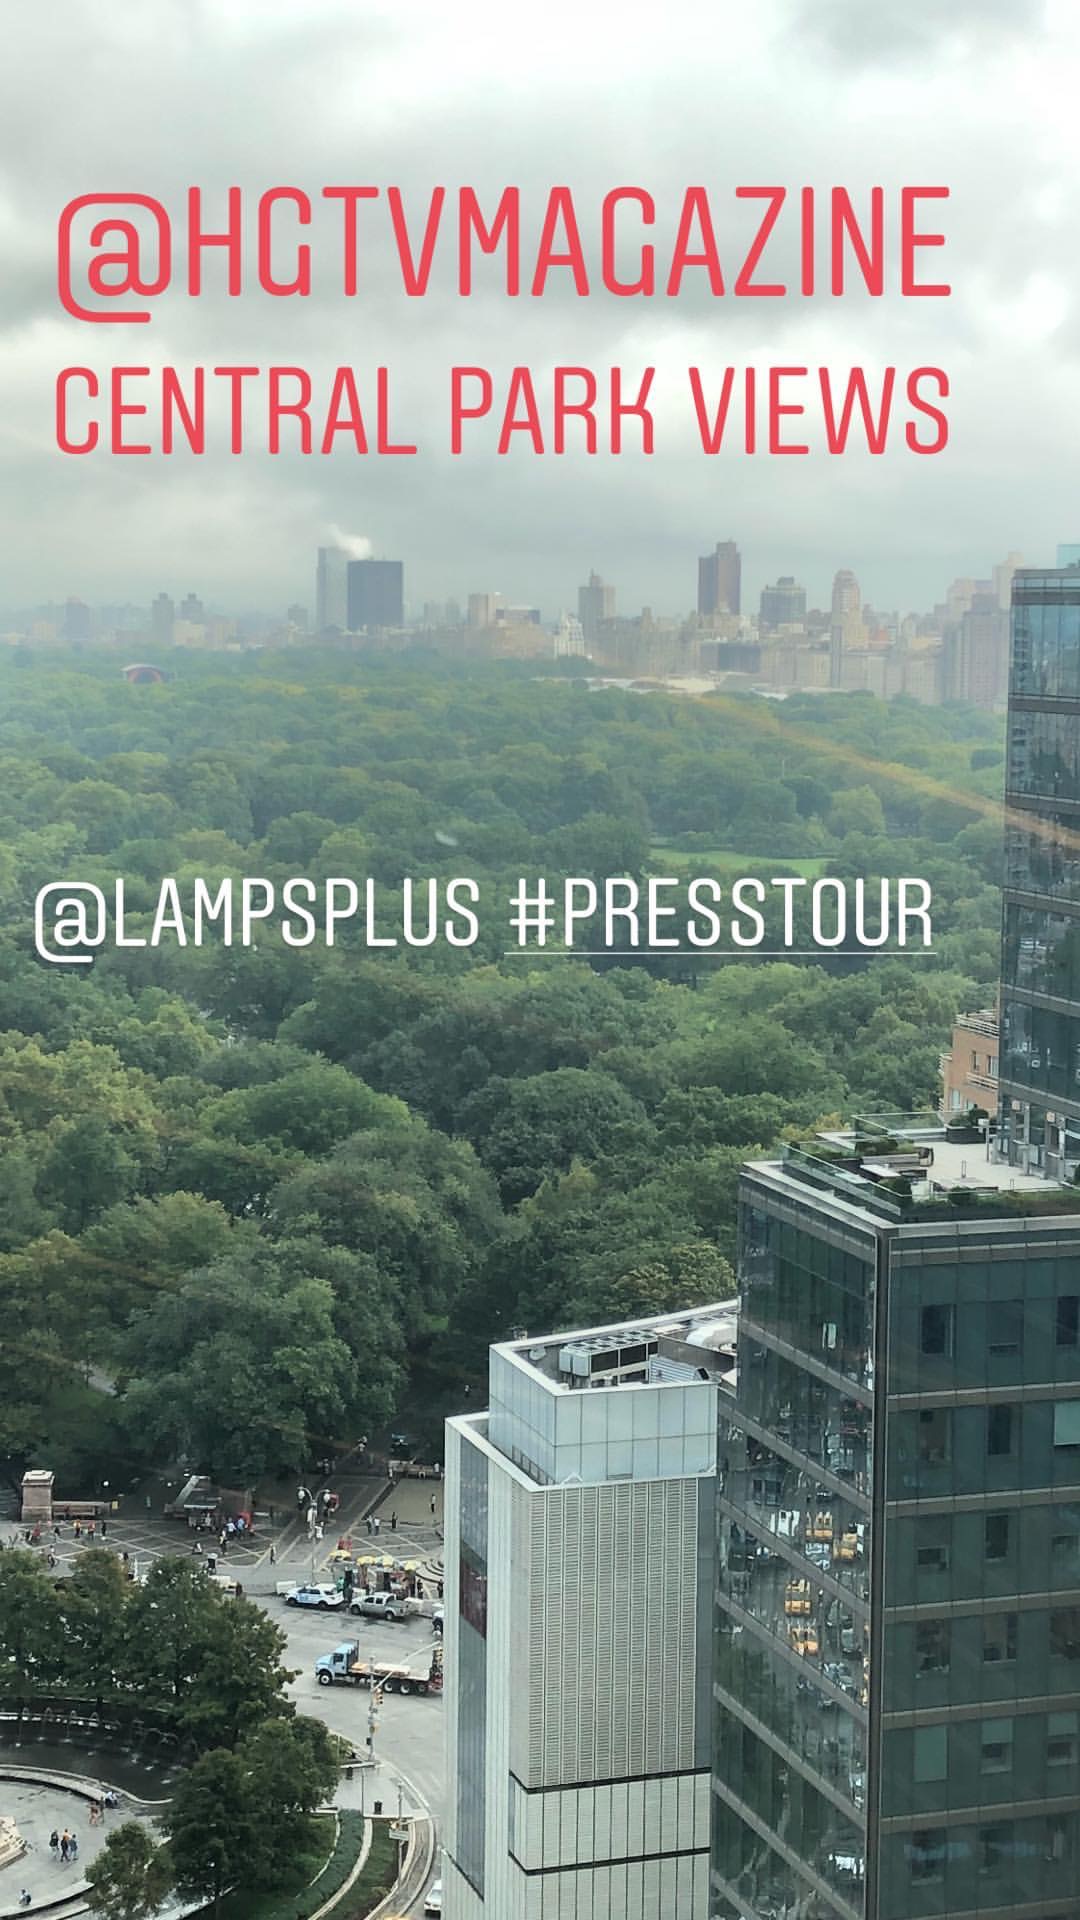 Central Park Views from HGTV Magazine Office in NYC